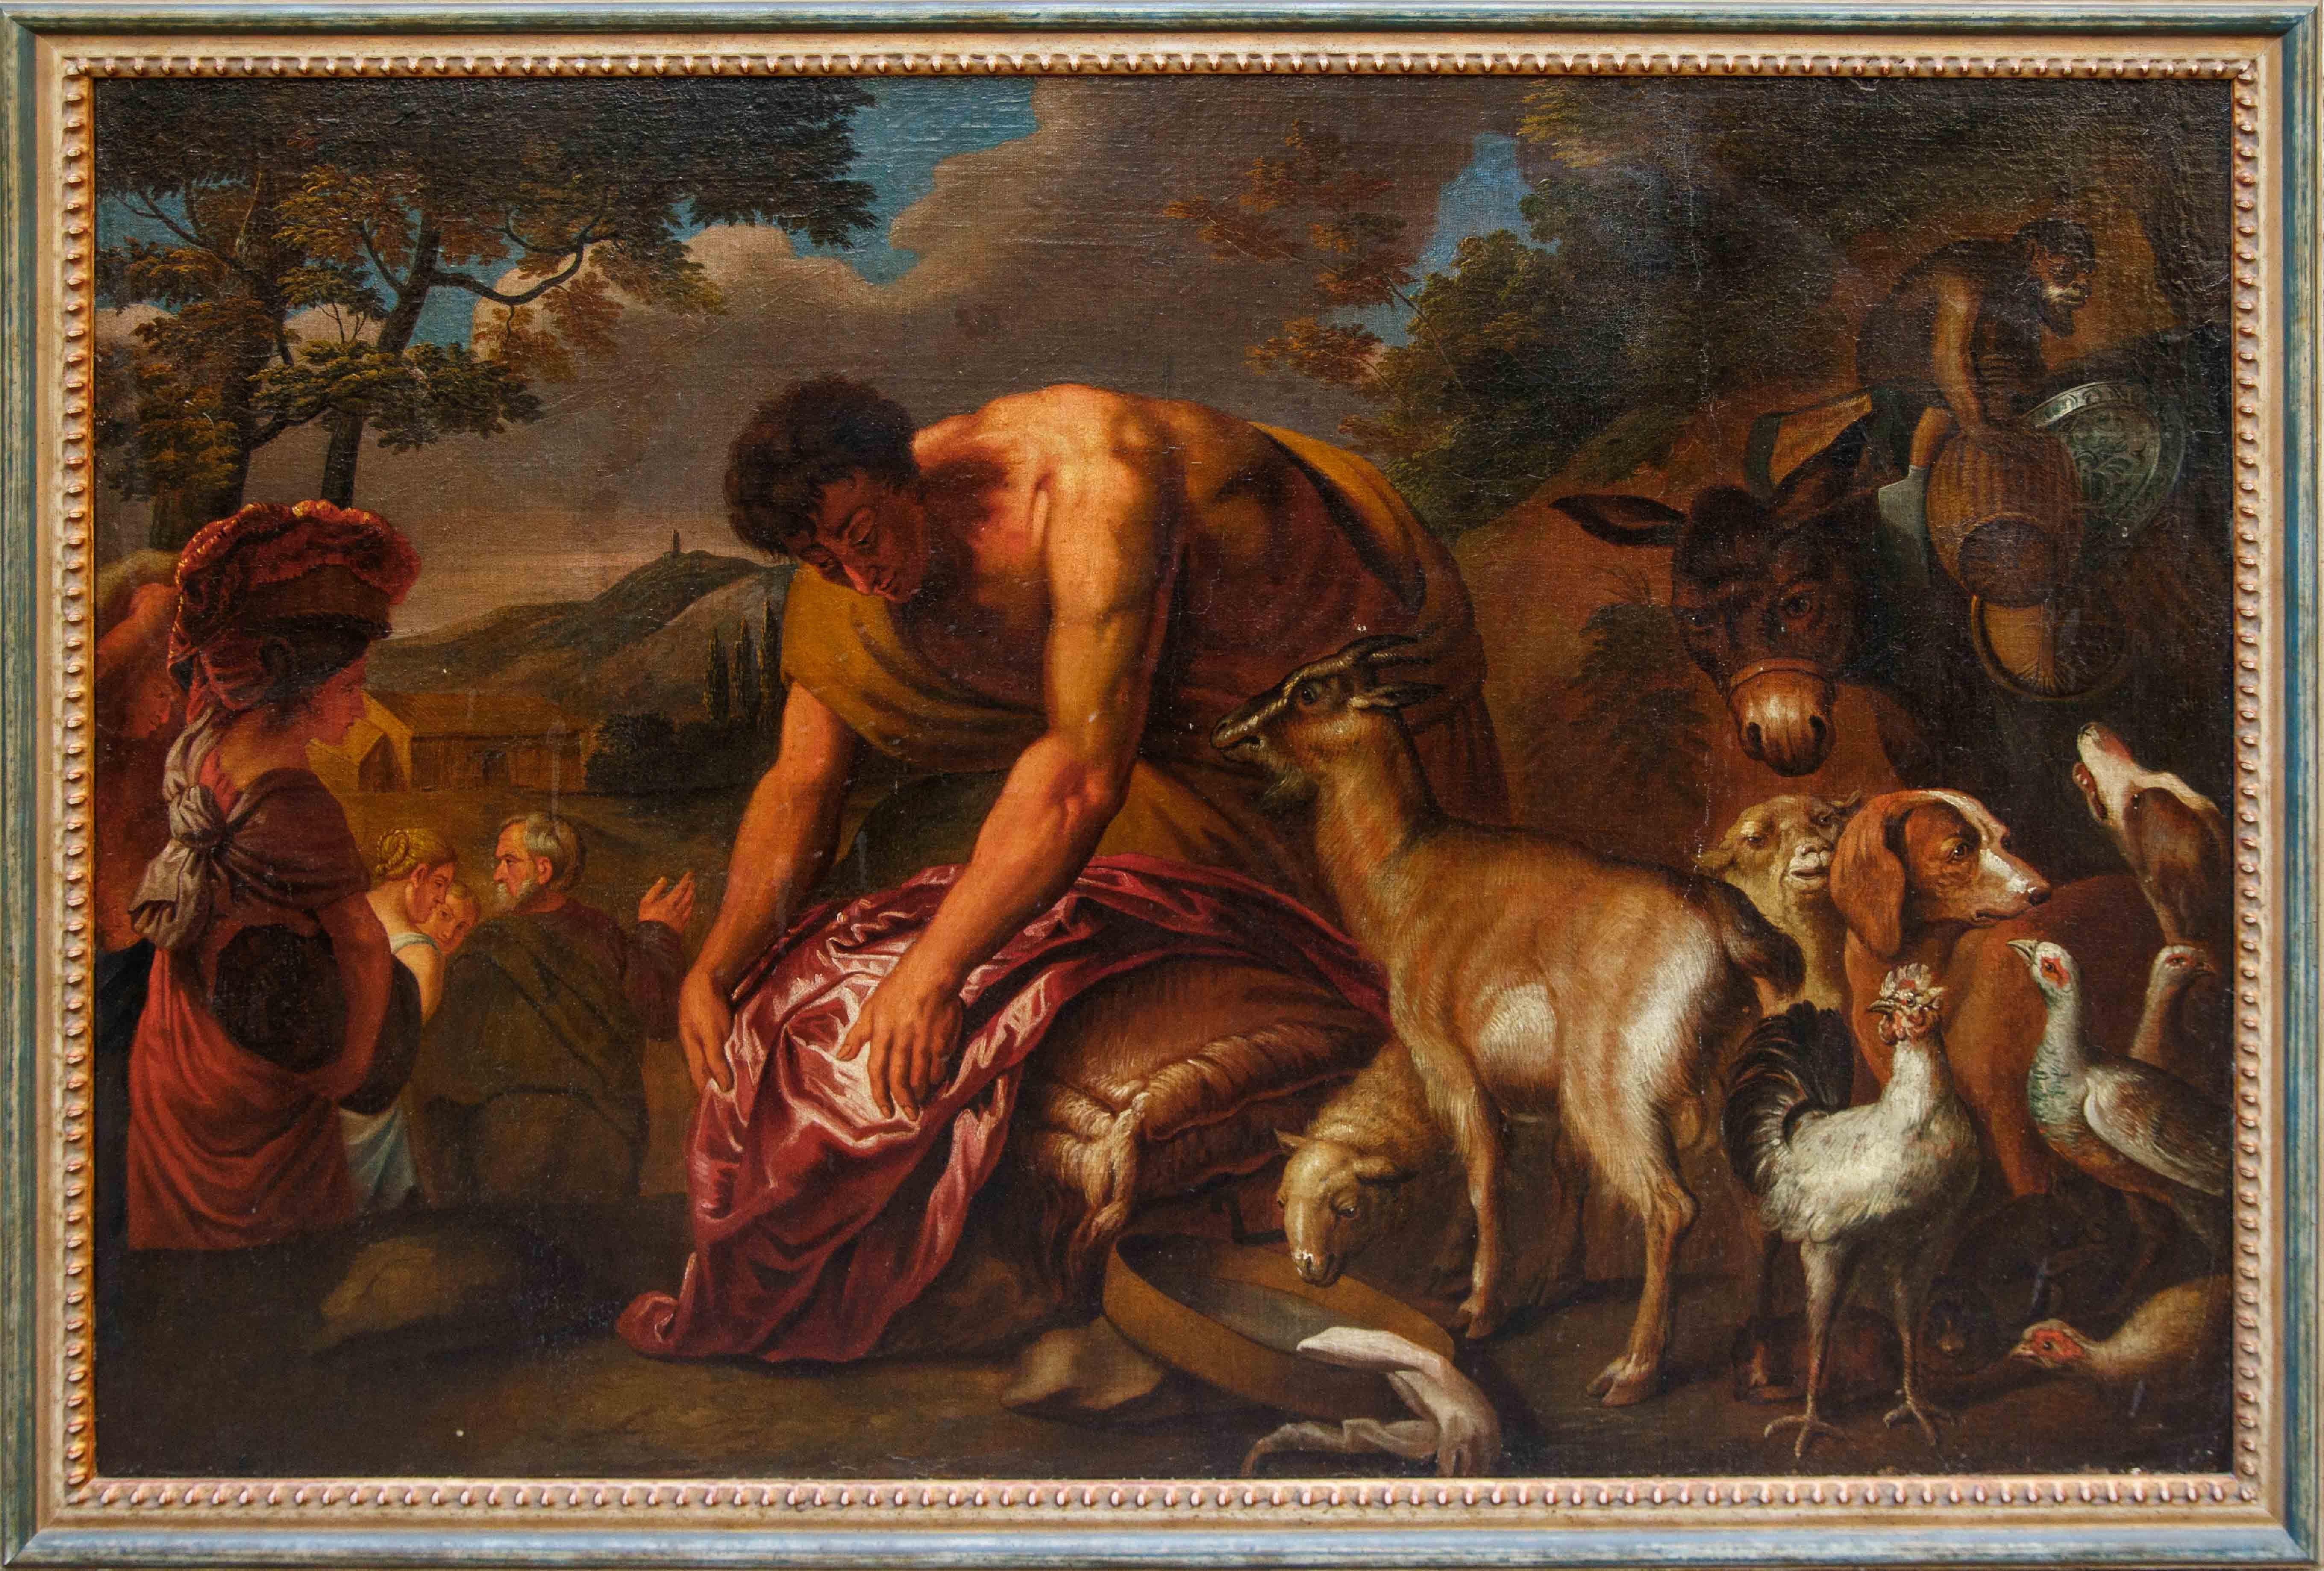 Jacob's departure for the land of Canaan Canvas from the Grechetto Workshop